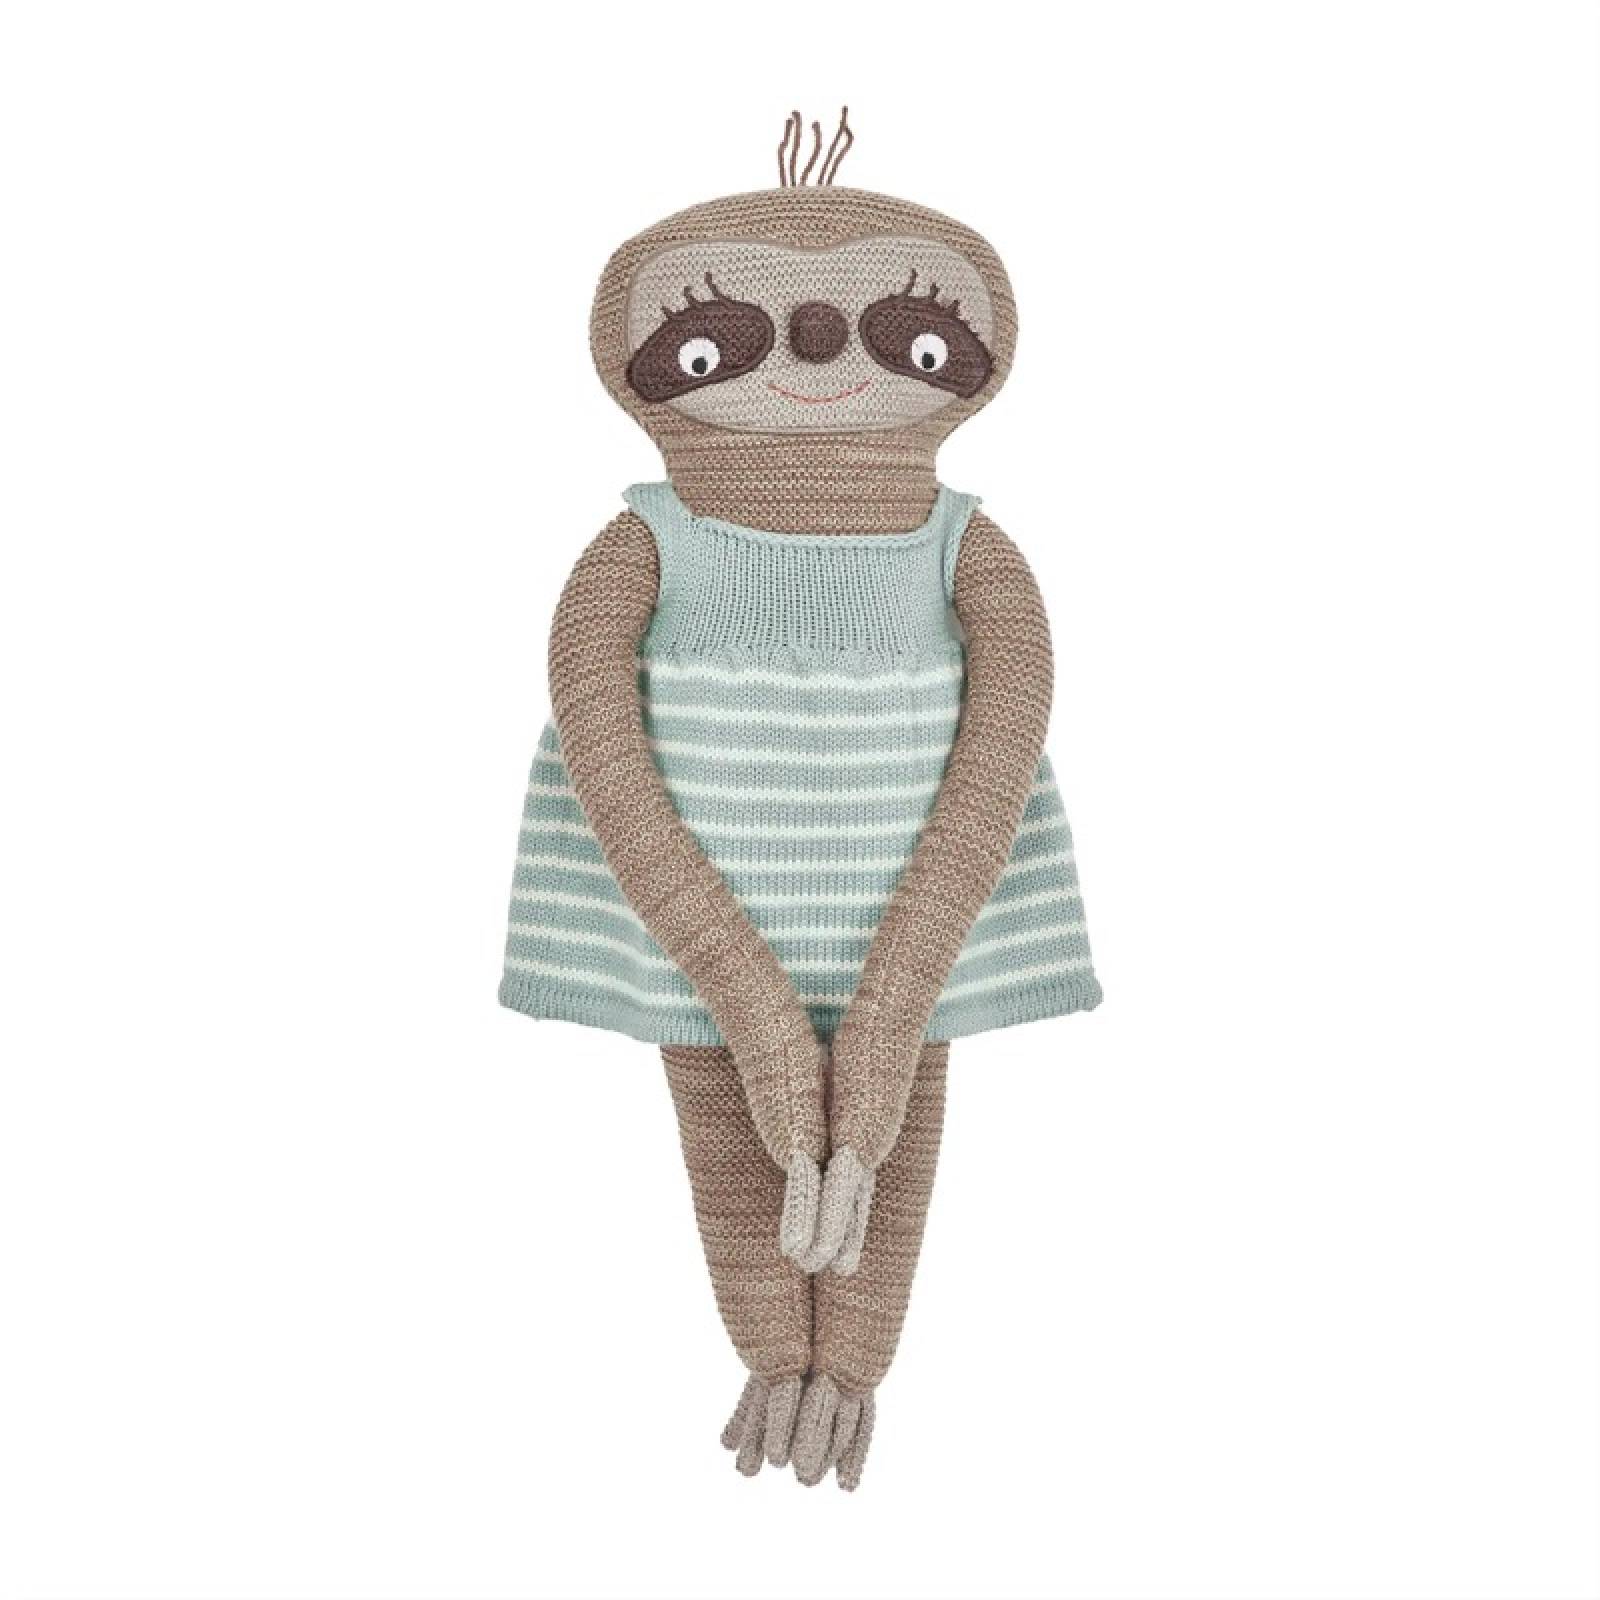 Hanna Sloth Knitted Soft Toy thumbnails